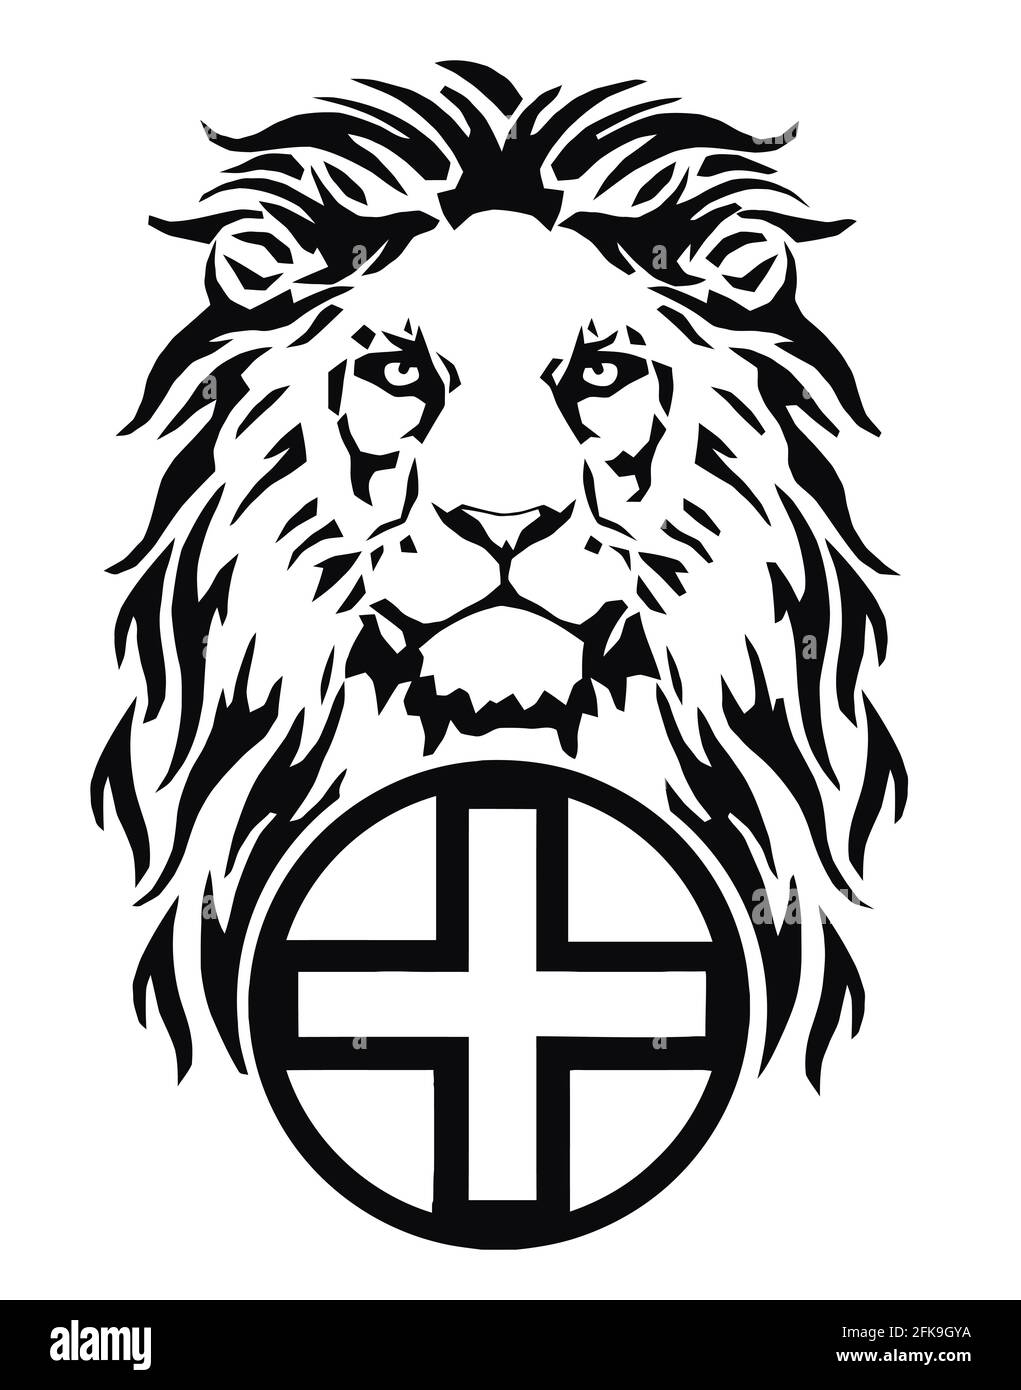 The Lion's head and the symbol of Christianity - the catholic cross, drawing for tattoo, on a white background, illustration, black and white Stock Photo